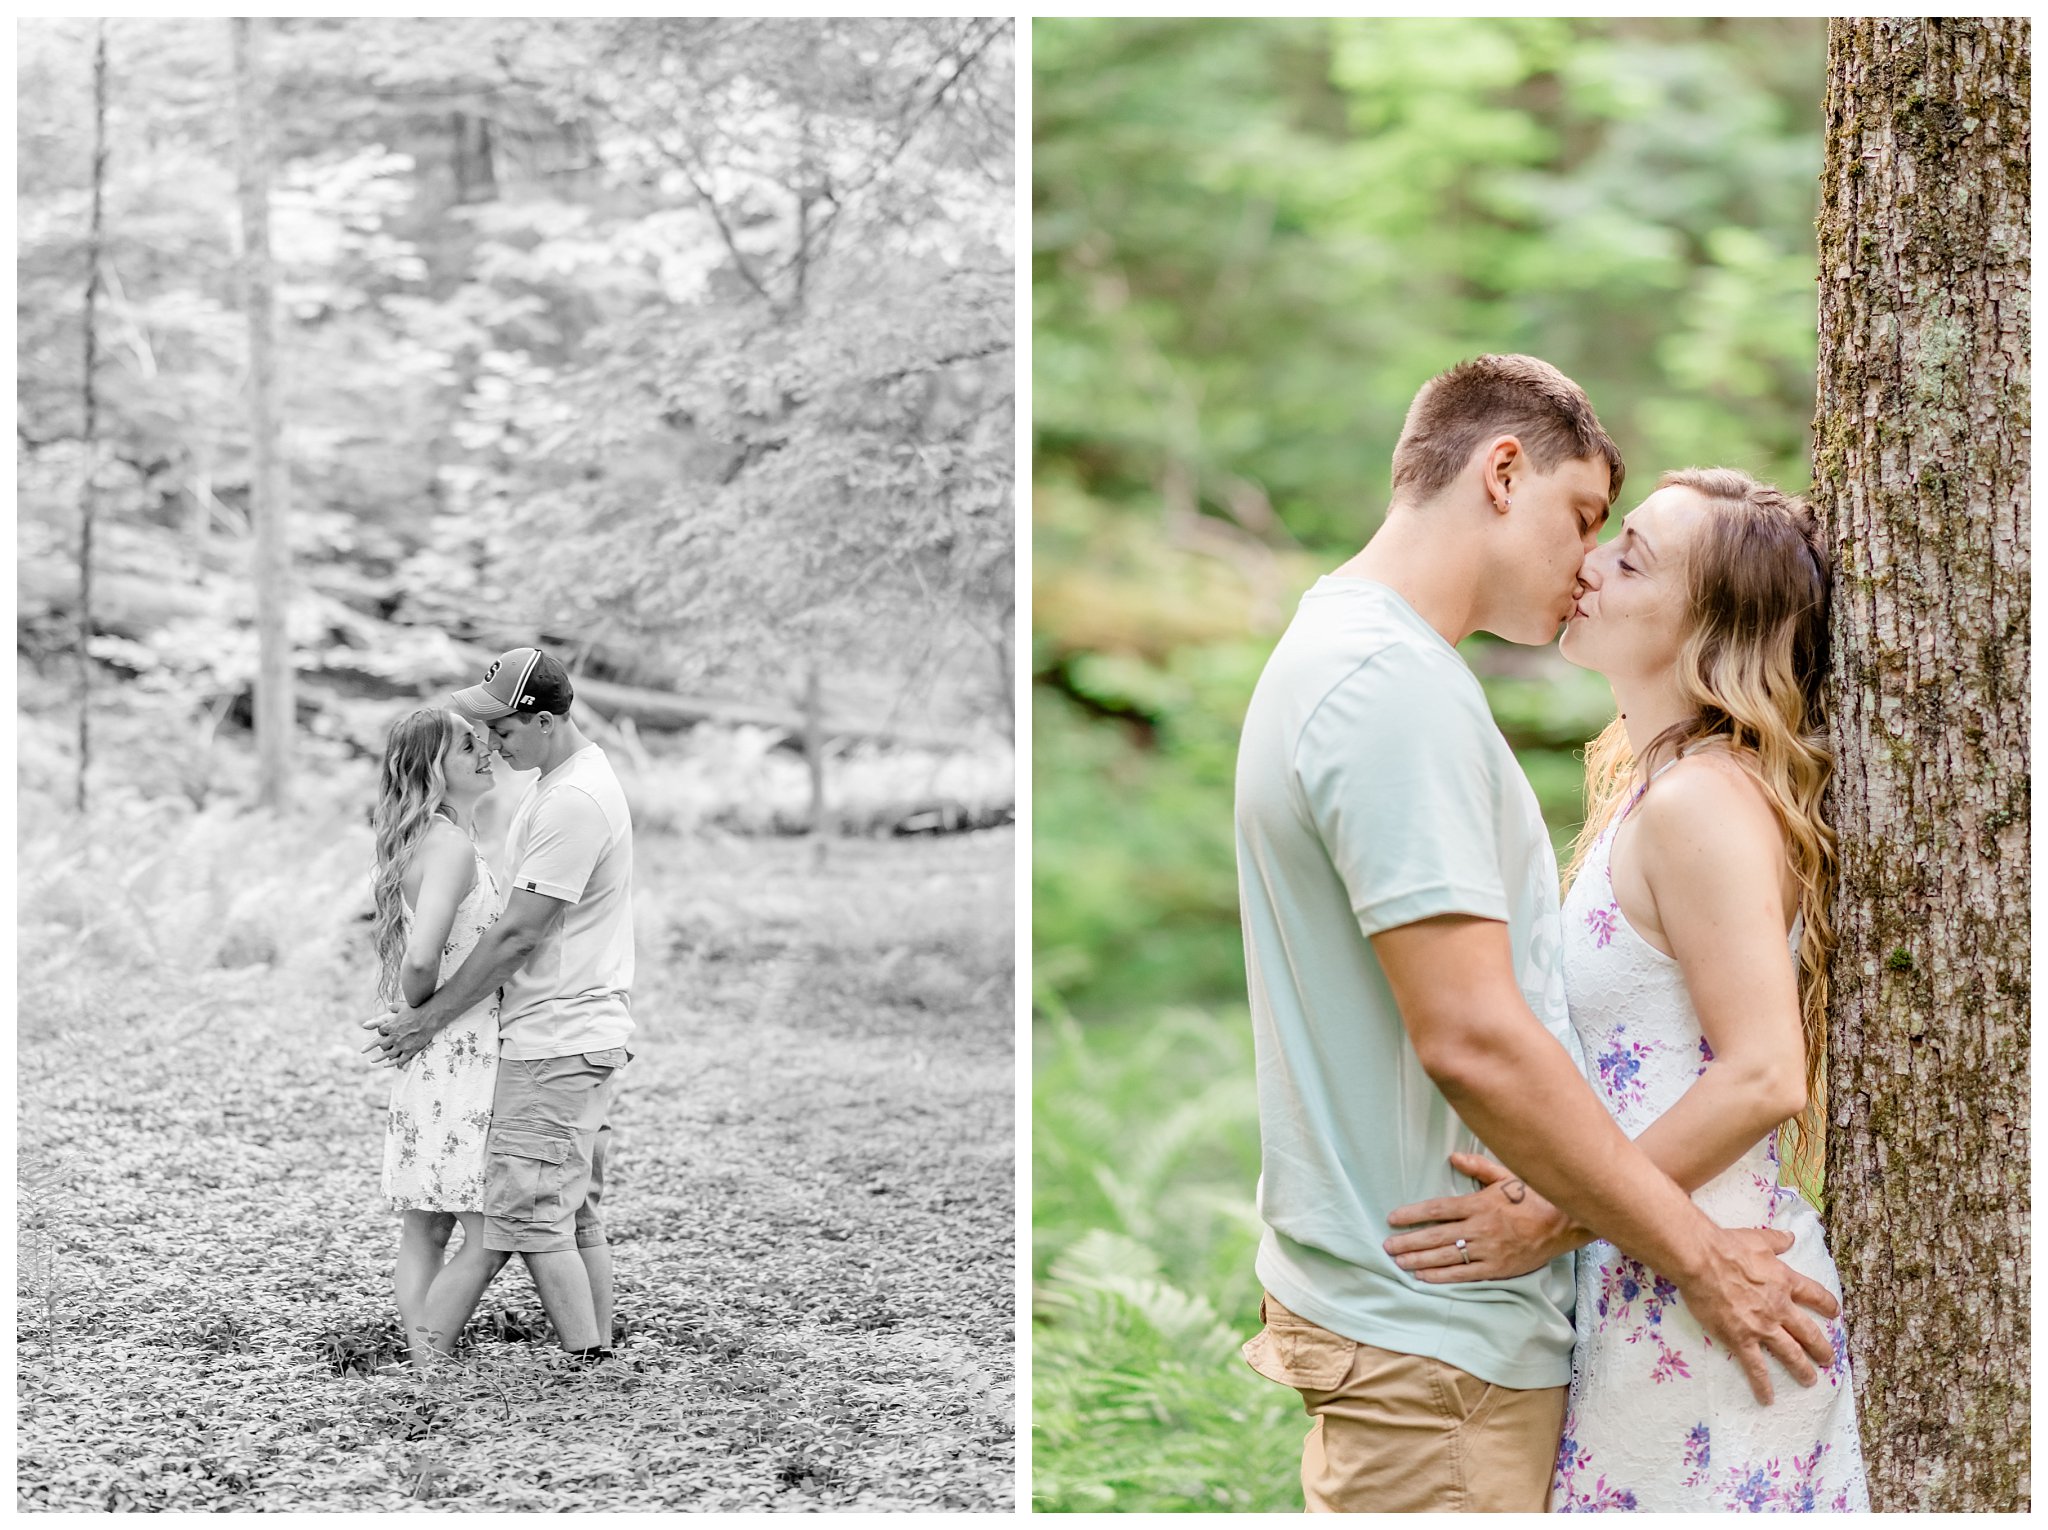 Joanna Young Photography Elizabeth and Cody Engagement Session_0005.jpg